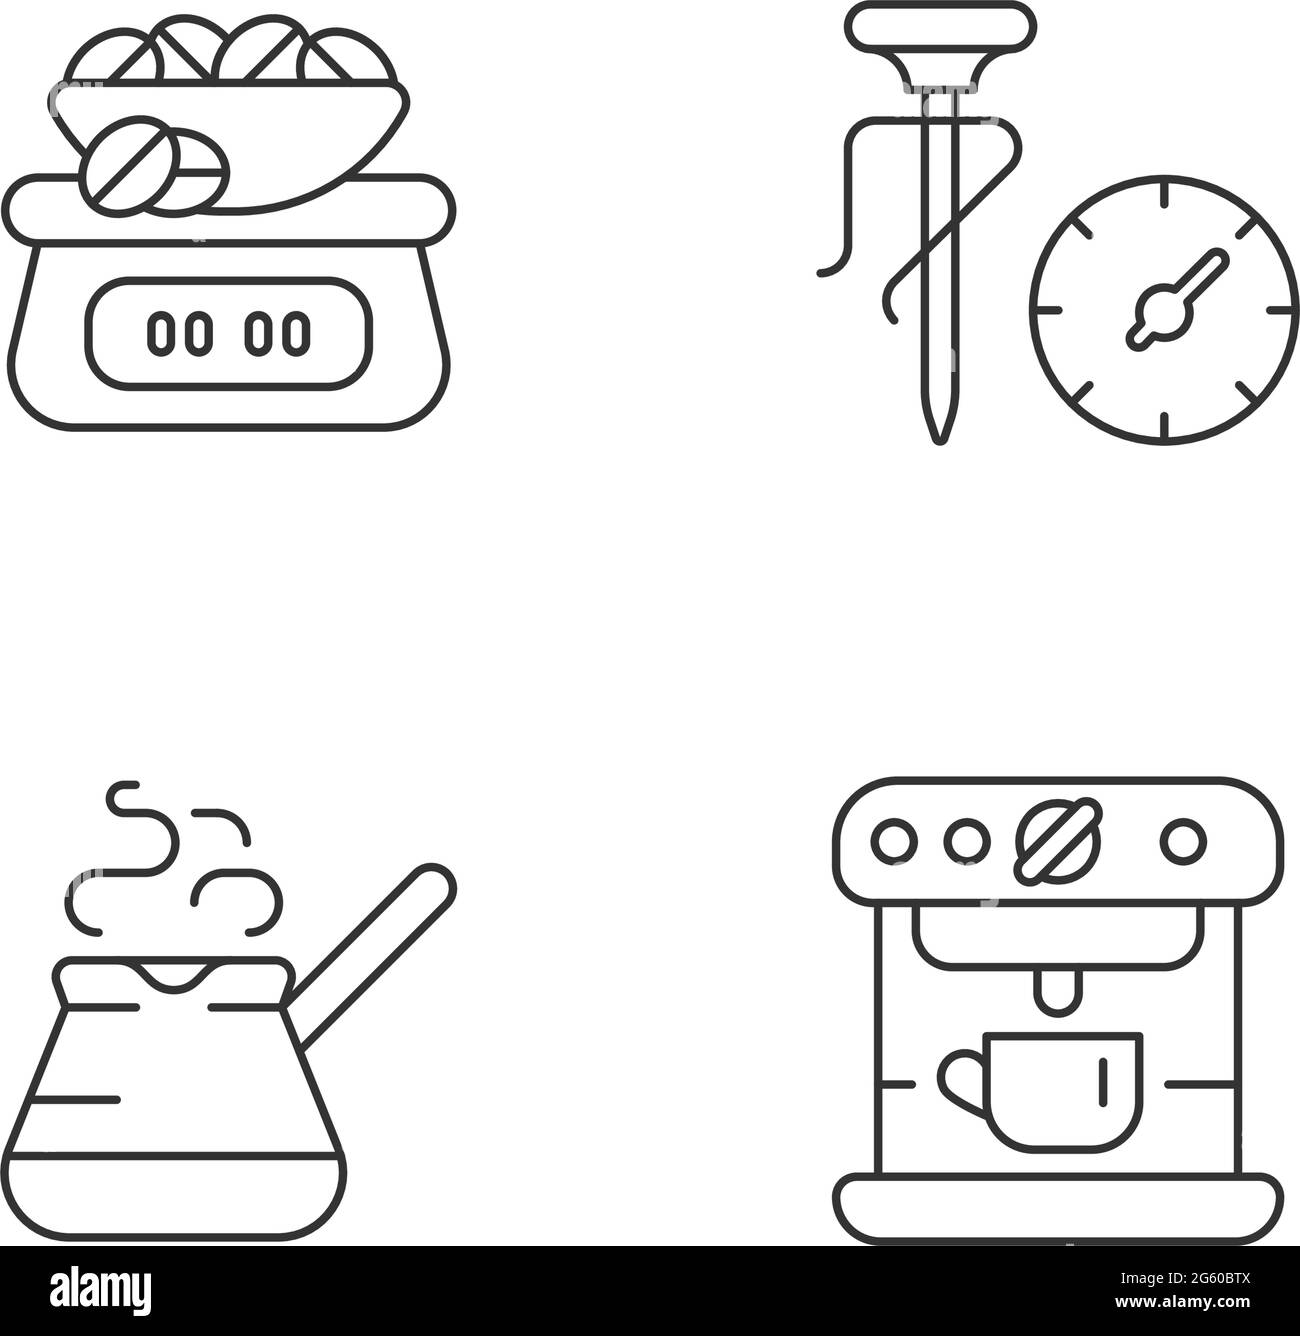 Coffee scale black glyph icon. Appliance for measuring beans